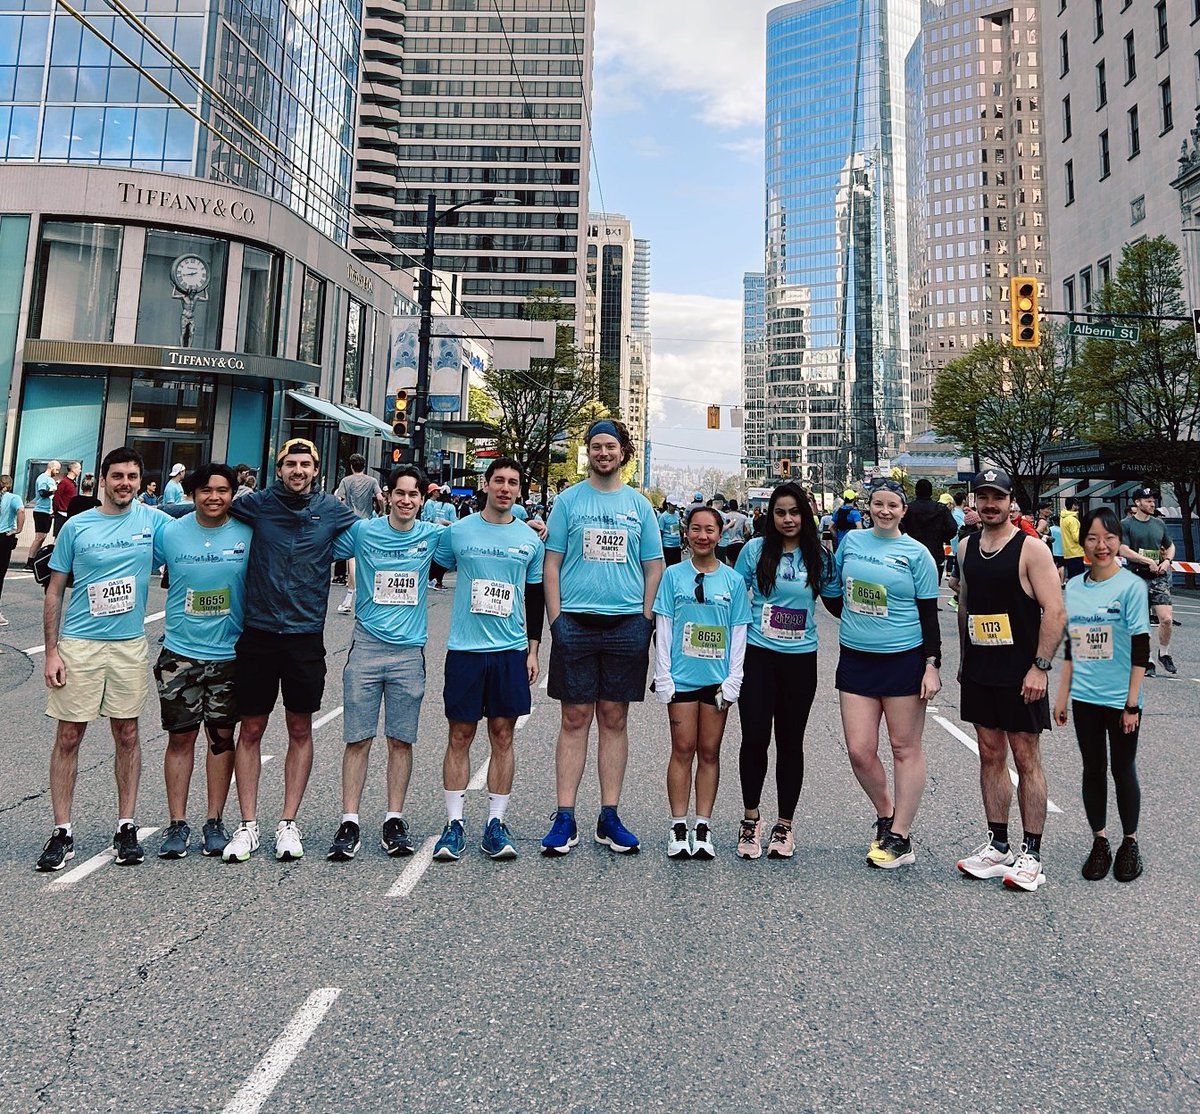 Congratulations to our team members who participated in Sunday's annual Vancouver Sun Run!  A couple of shiny new personal bests, and tons of smiles for a sunny day! 

#WeAreGS #CreativeThinkers #VanSunRun #StructuralEngineers #StructuralEngineering #WomenInEngineering